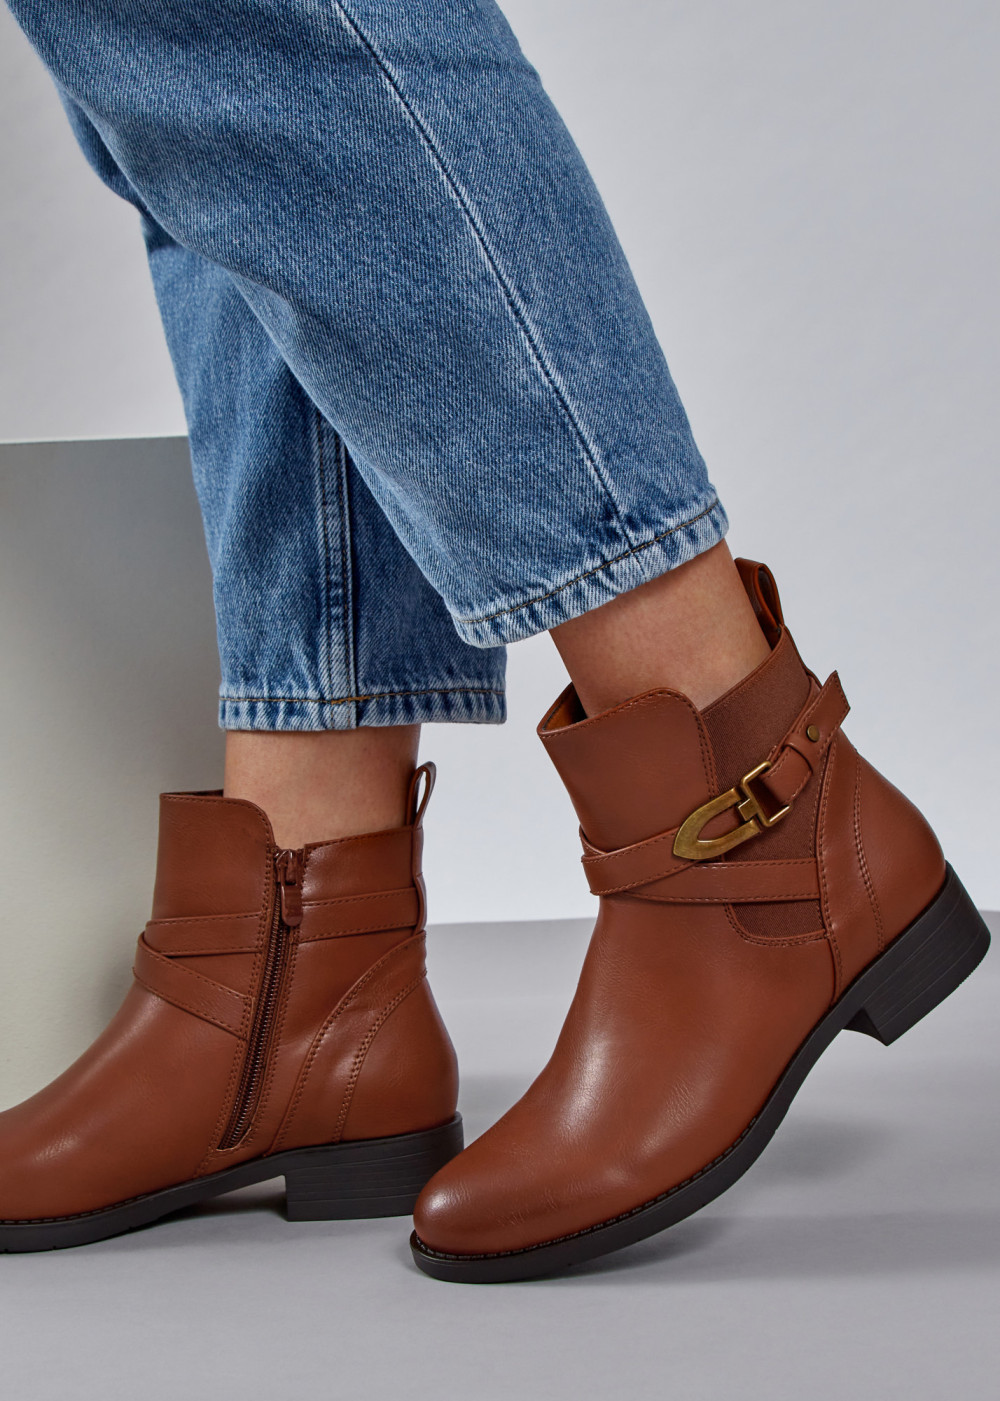 https://assets.shoelace.ie/thumbs/1000xauto/2023-09::1695324183-brown-tan-clip-design-flat-ankle-boots-3.jpg